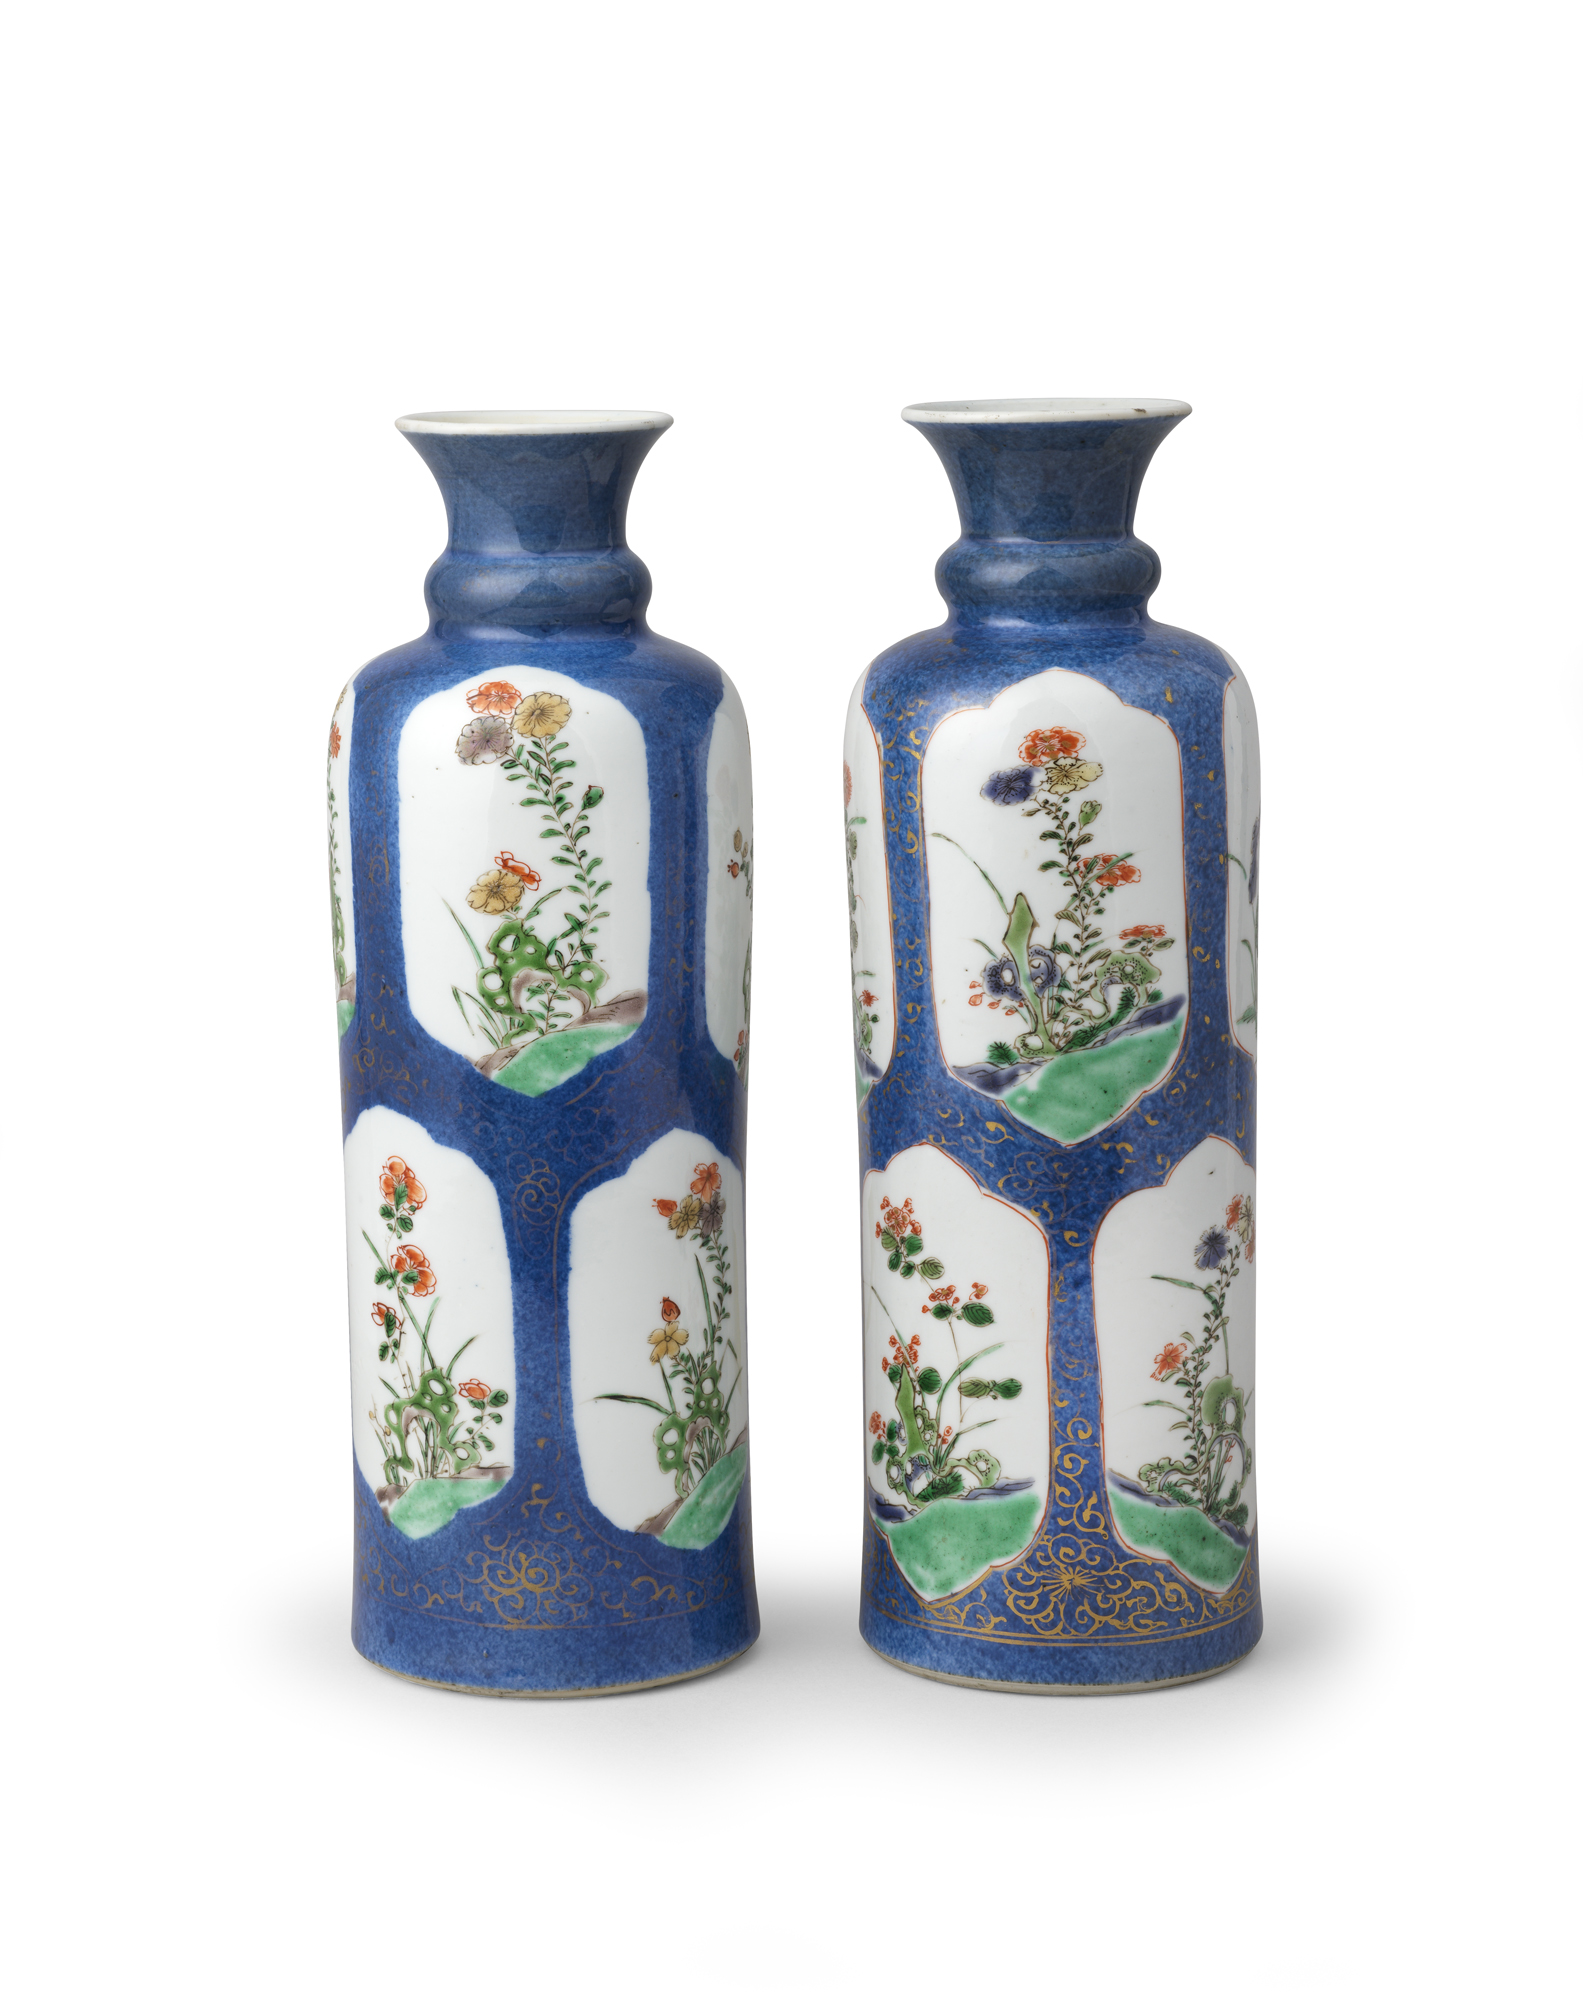 Pair of Vases, Porcelain decorated in underglaze powder blue, overglaze famille verte enamels and gold, China - Qing dynasty, Kangxi period (1662-1722), H. 26.5 cm Ø 9.5 cm